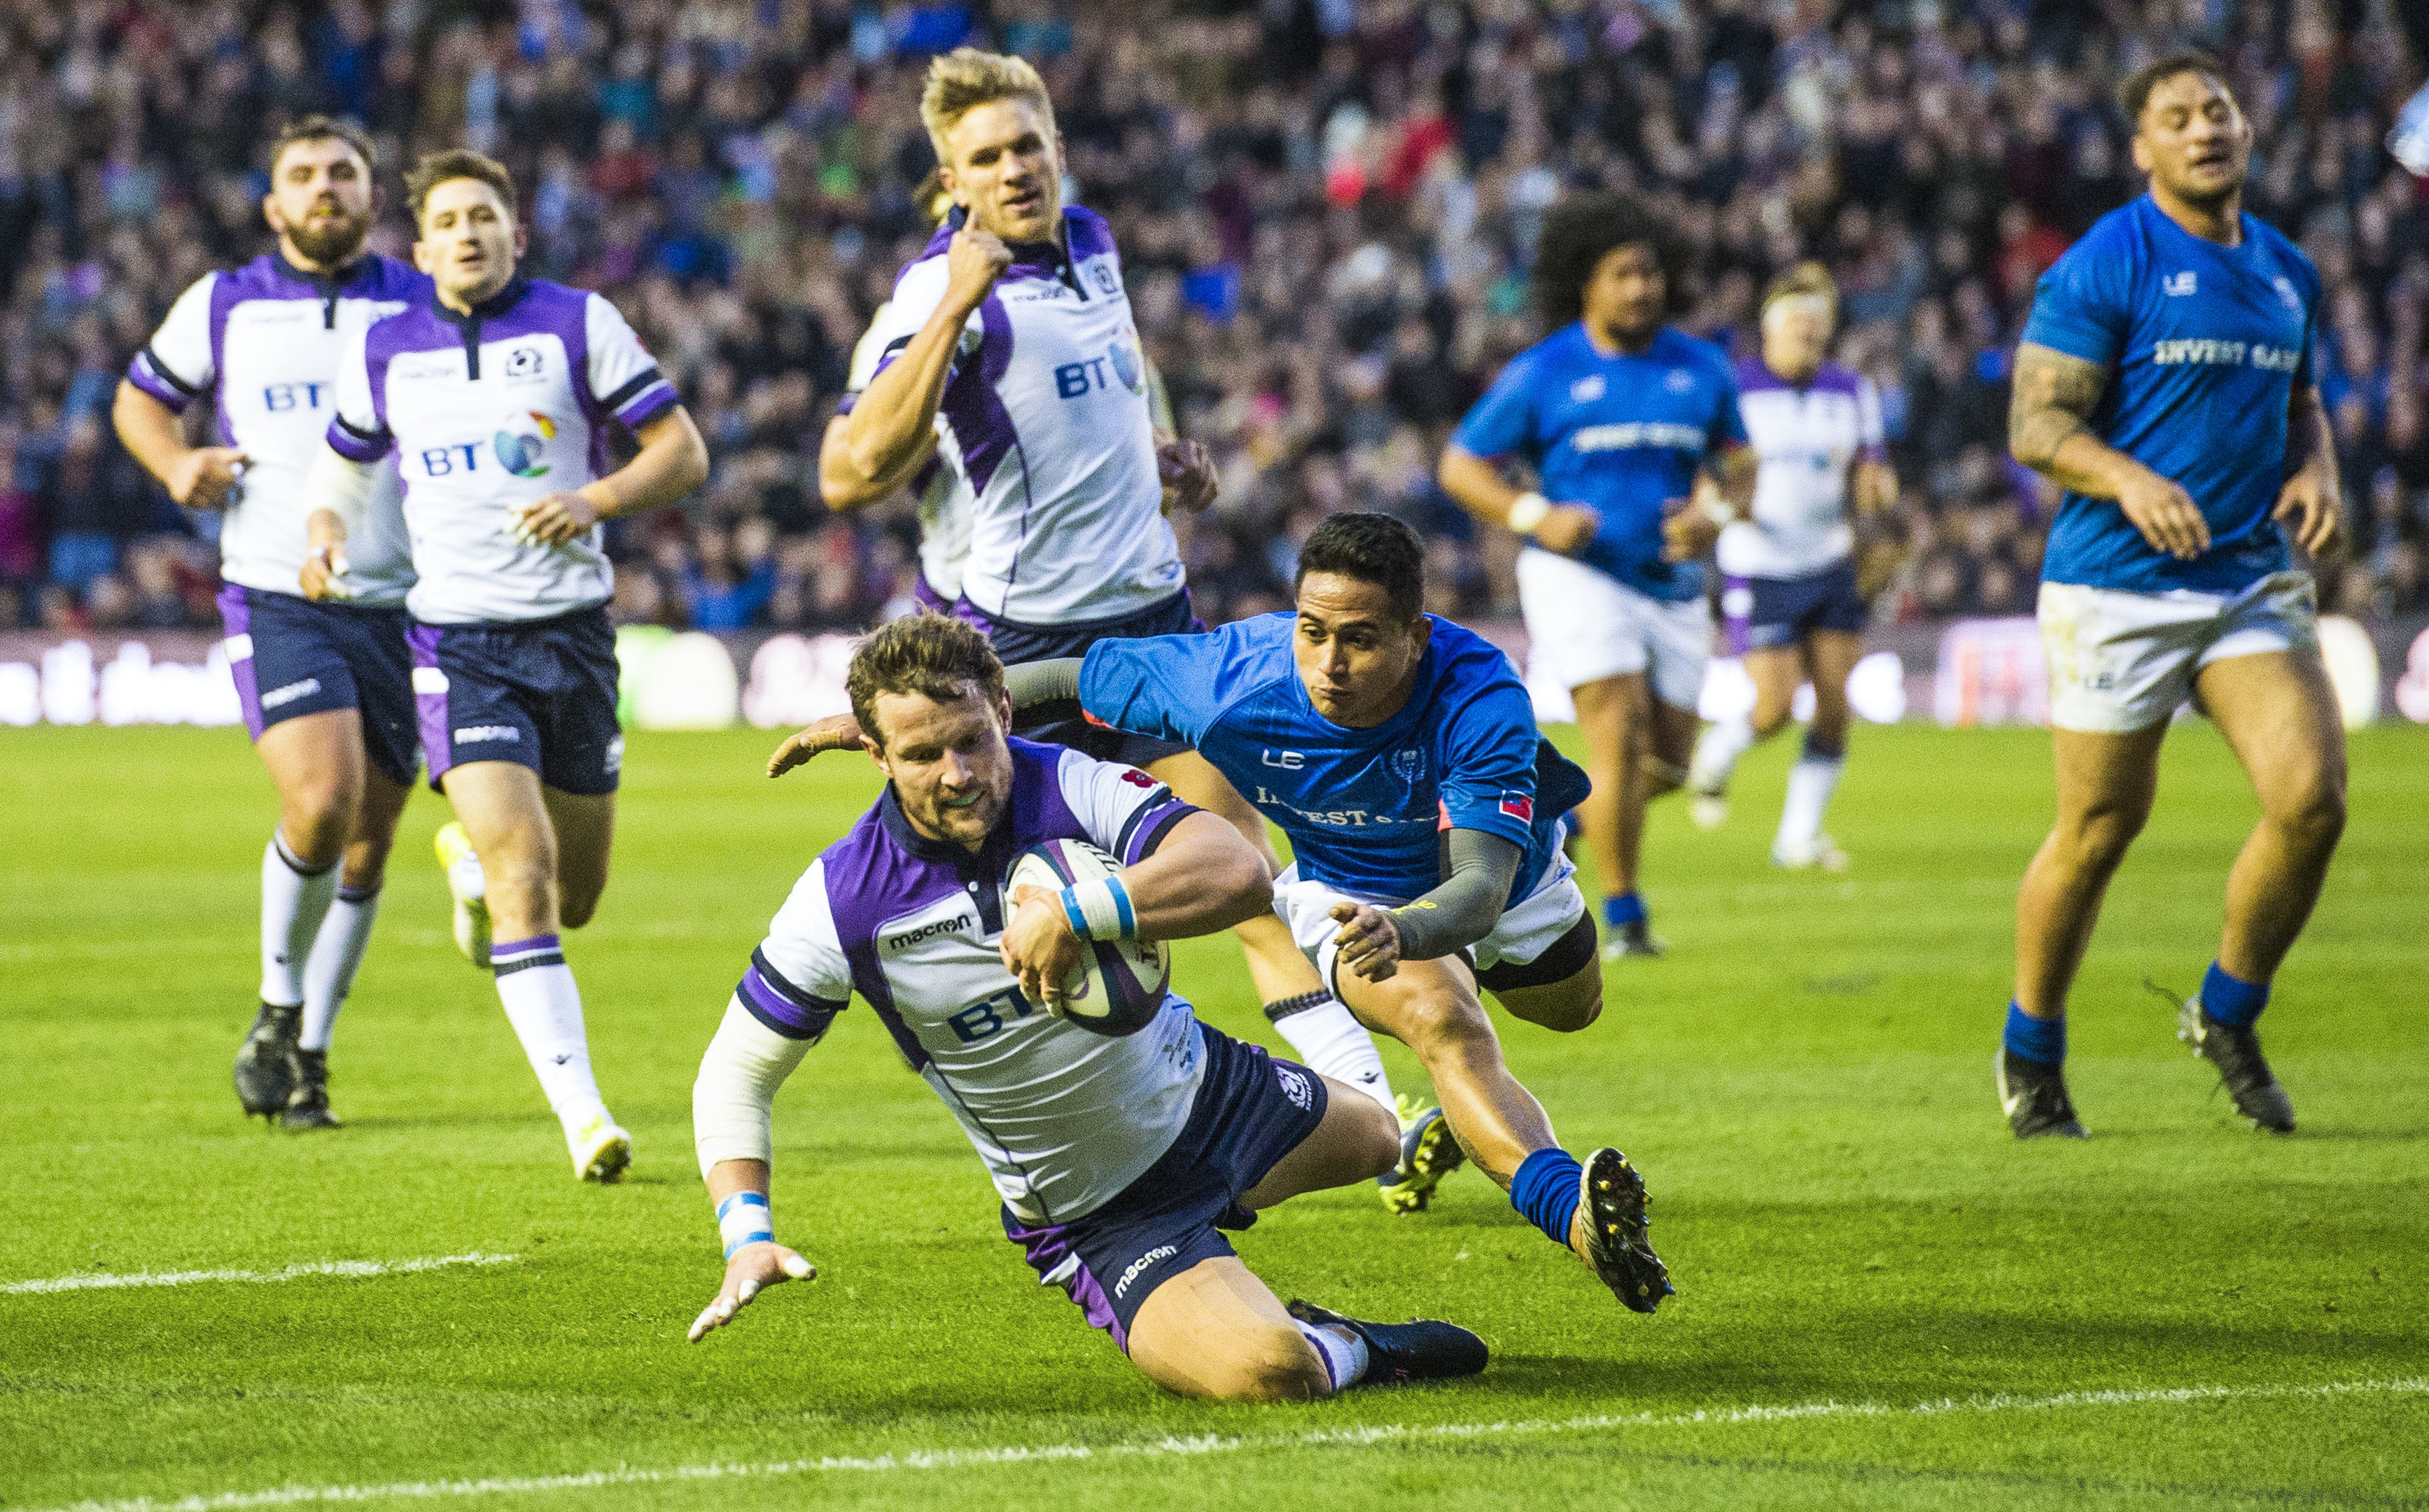 Peter Horne scores Scotland's sixth try which just about secured victory over Samoa.